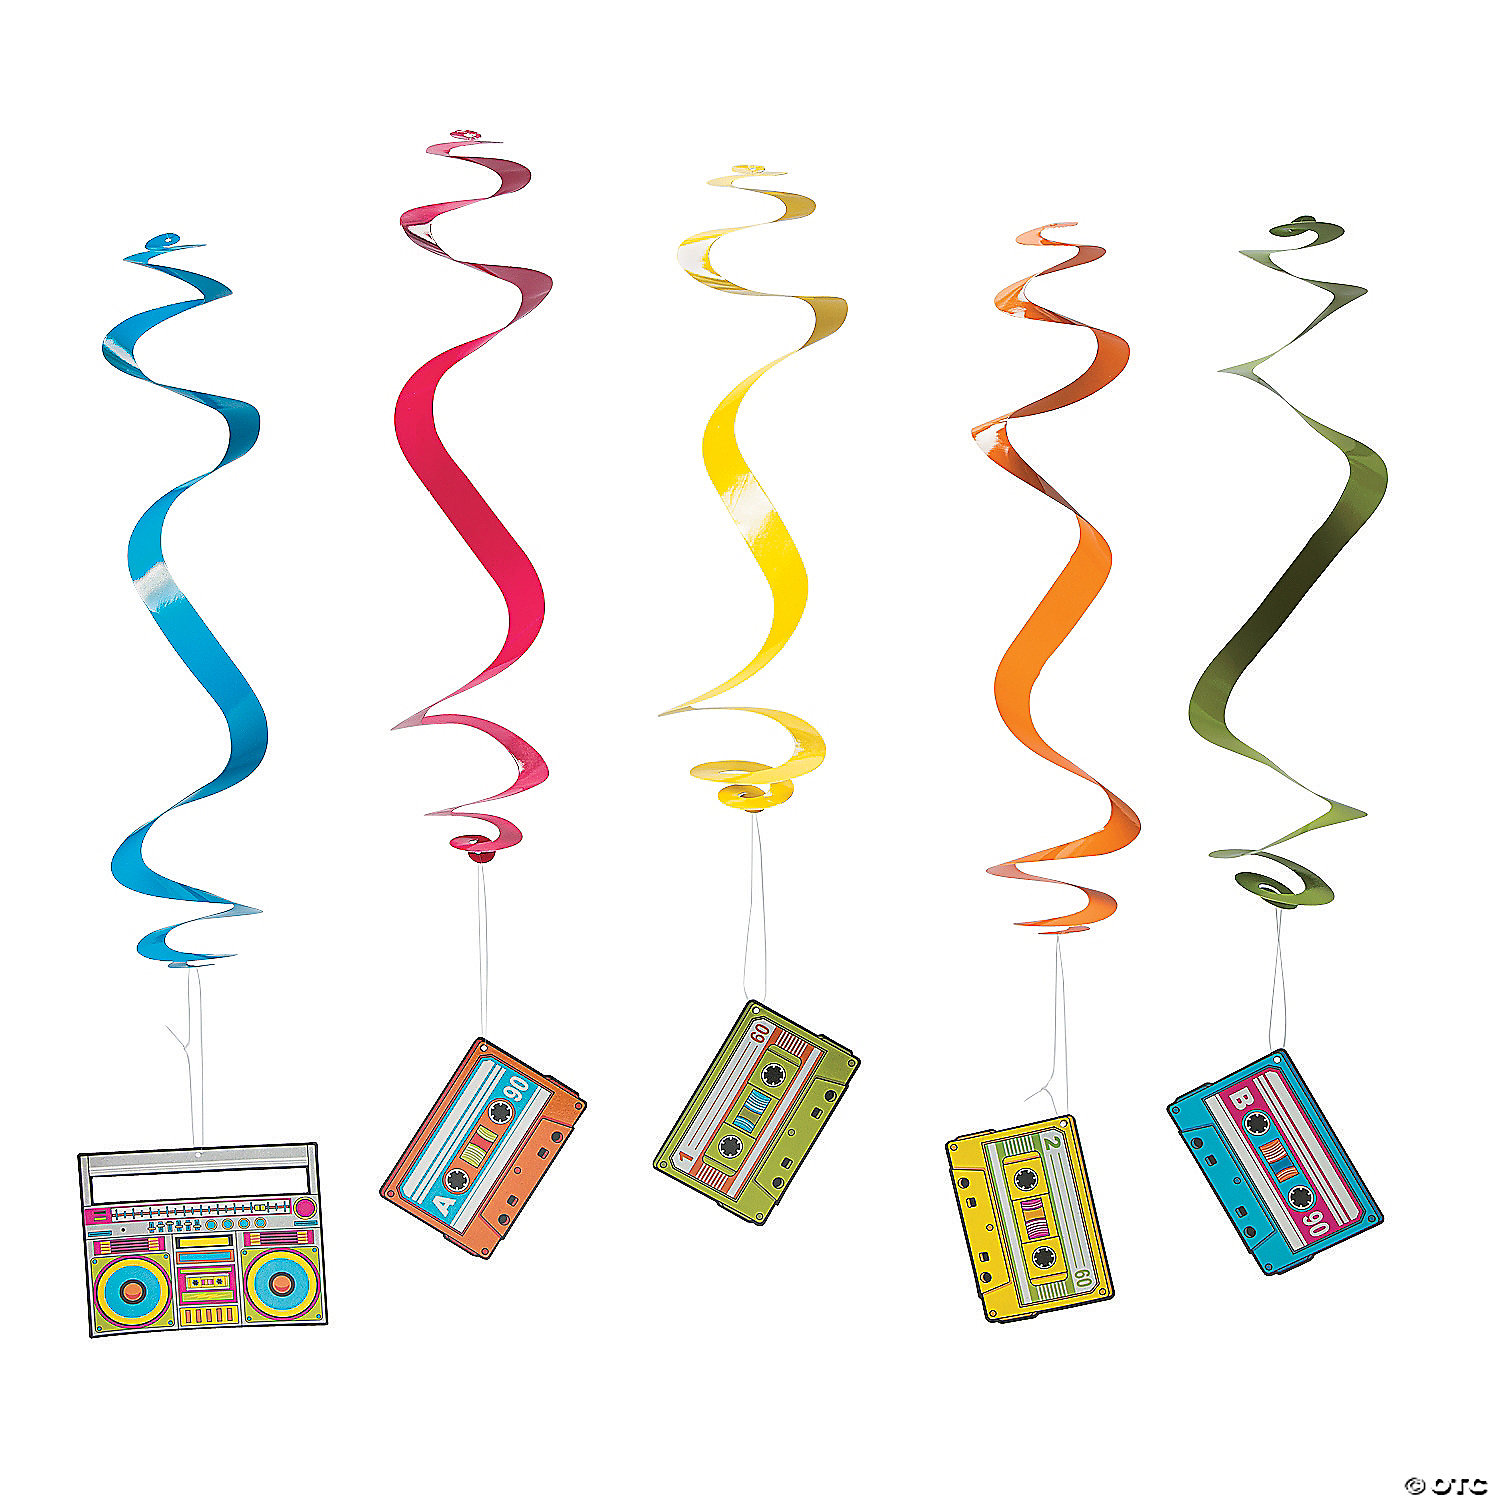 12 TOTALLY 80's neon CASSETTE TAPE Hanging Swirls BIRTHDAY PARTY decorations